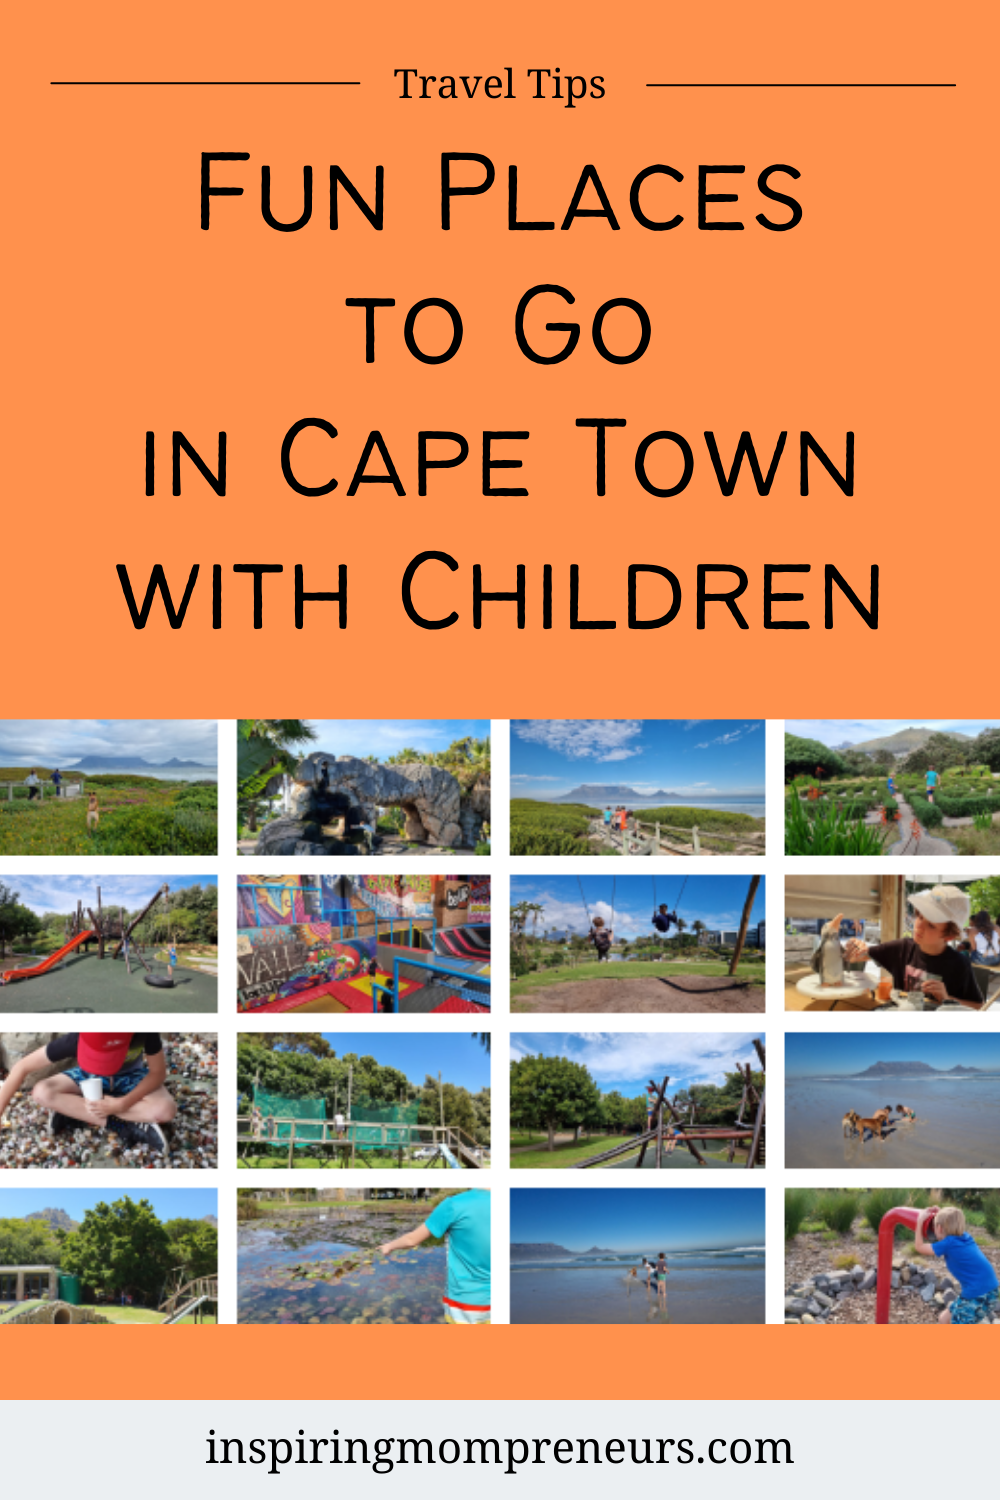 Looking for the best places to travel with children? Add Cape Town South Africa to your list. There are so many fun places to go in Cape Town. Here's our top 5.